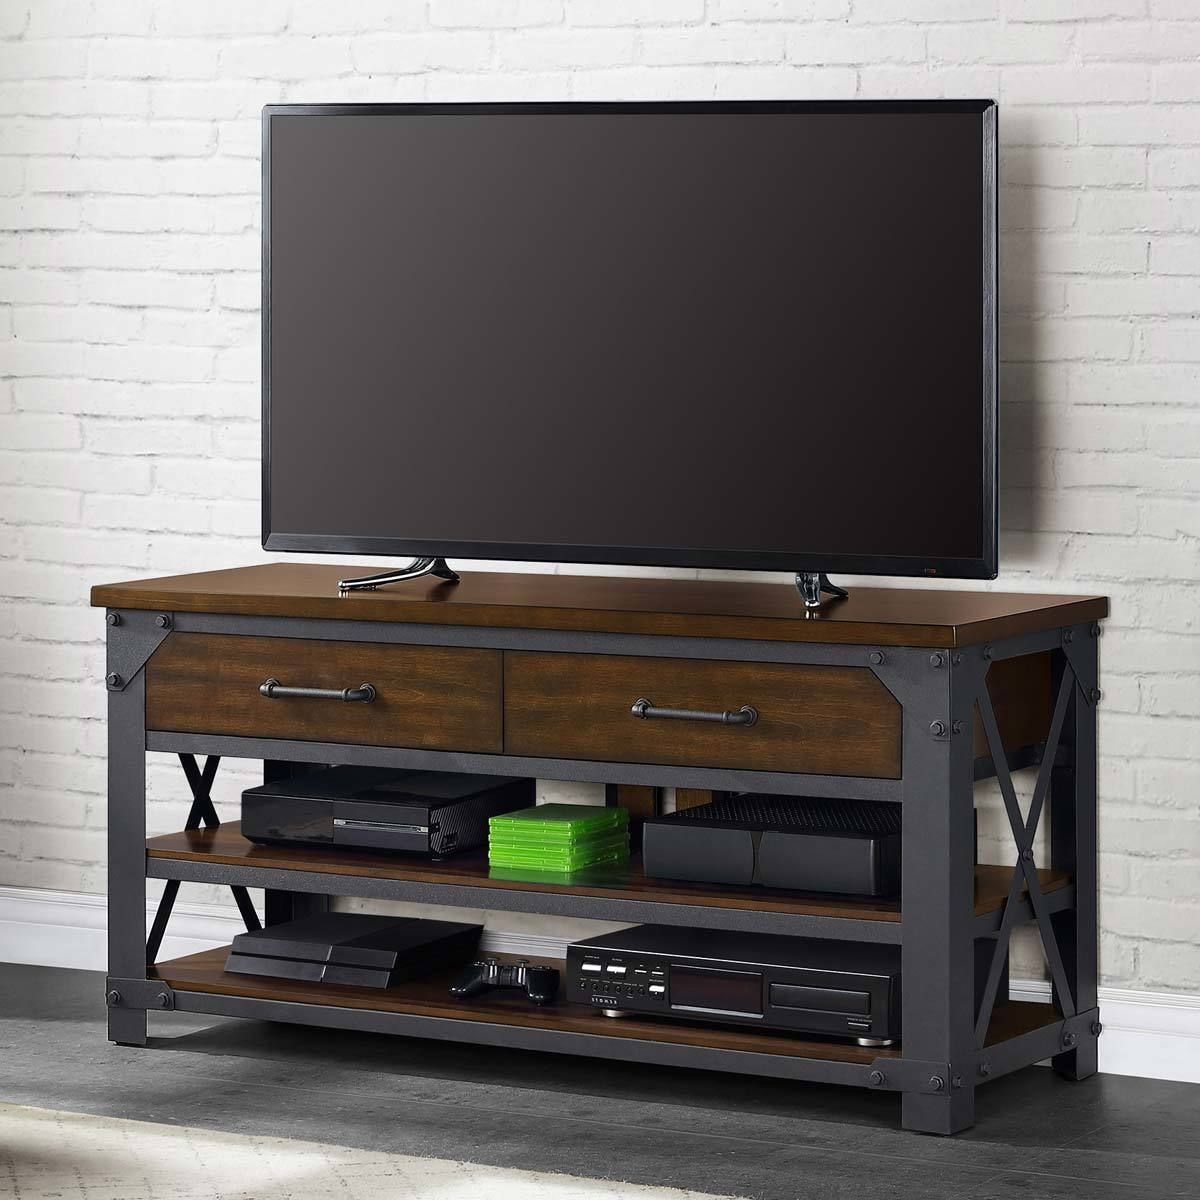 Bayside Furnishings Logan 3 In 1 Tv Stand For Tvs Up To 65 Regarding Logan Tv Stands (View 5 of 20)